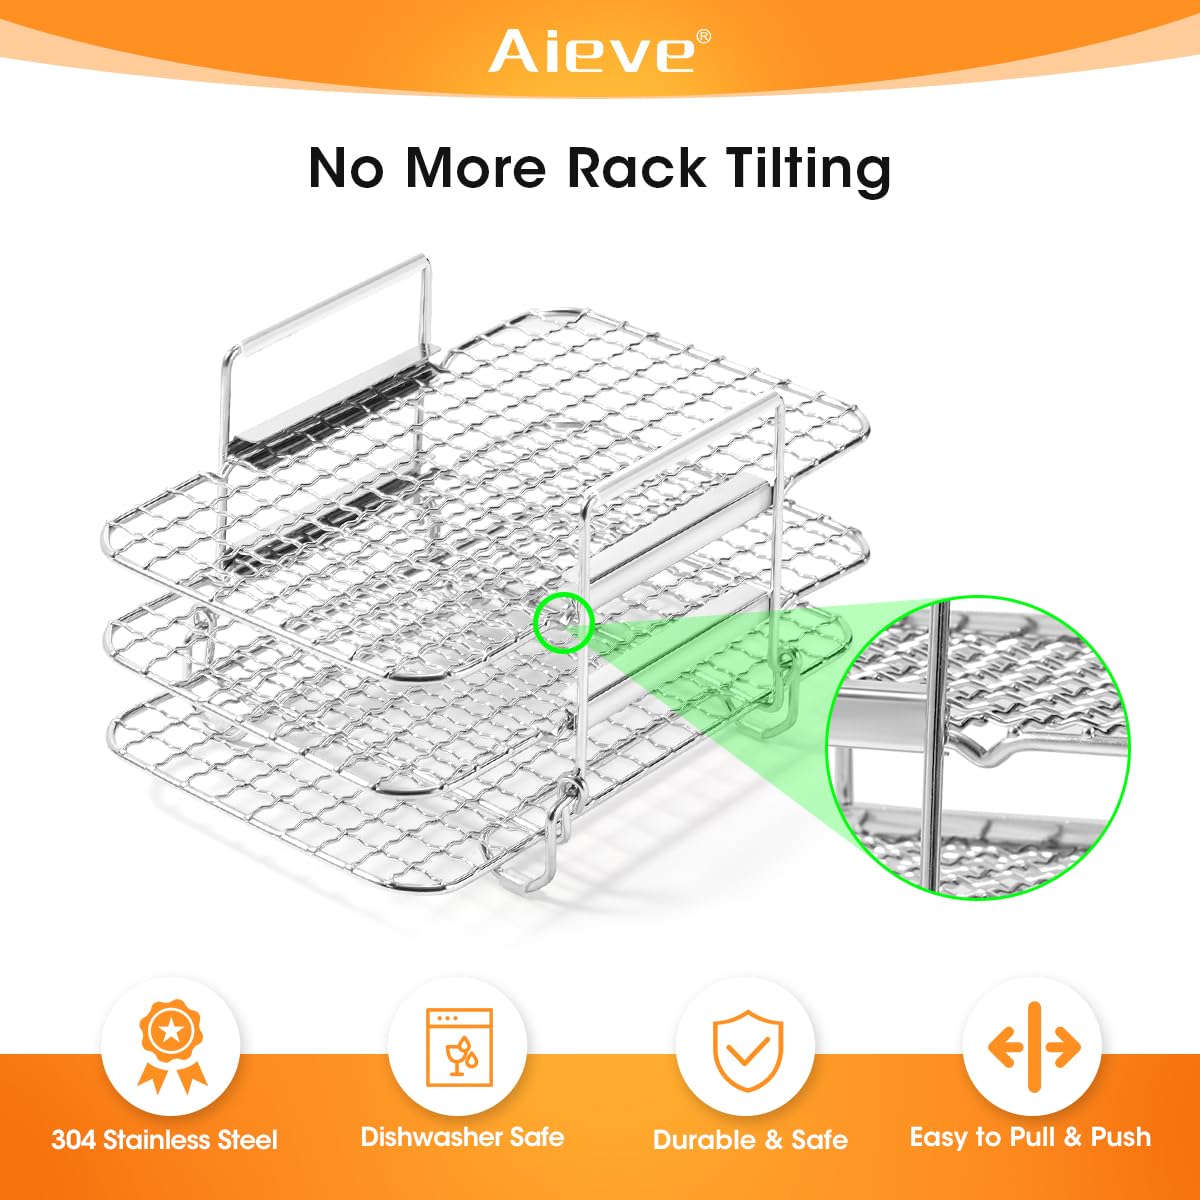 This for Ninja air fryer rack made of high-quality food grade 304 stainless steel